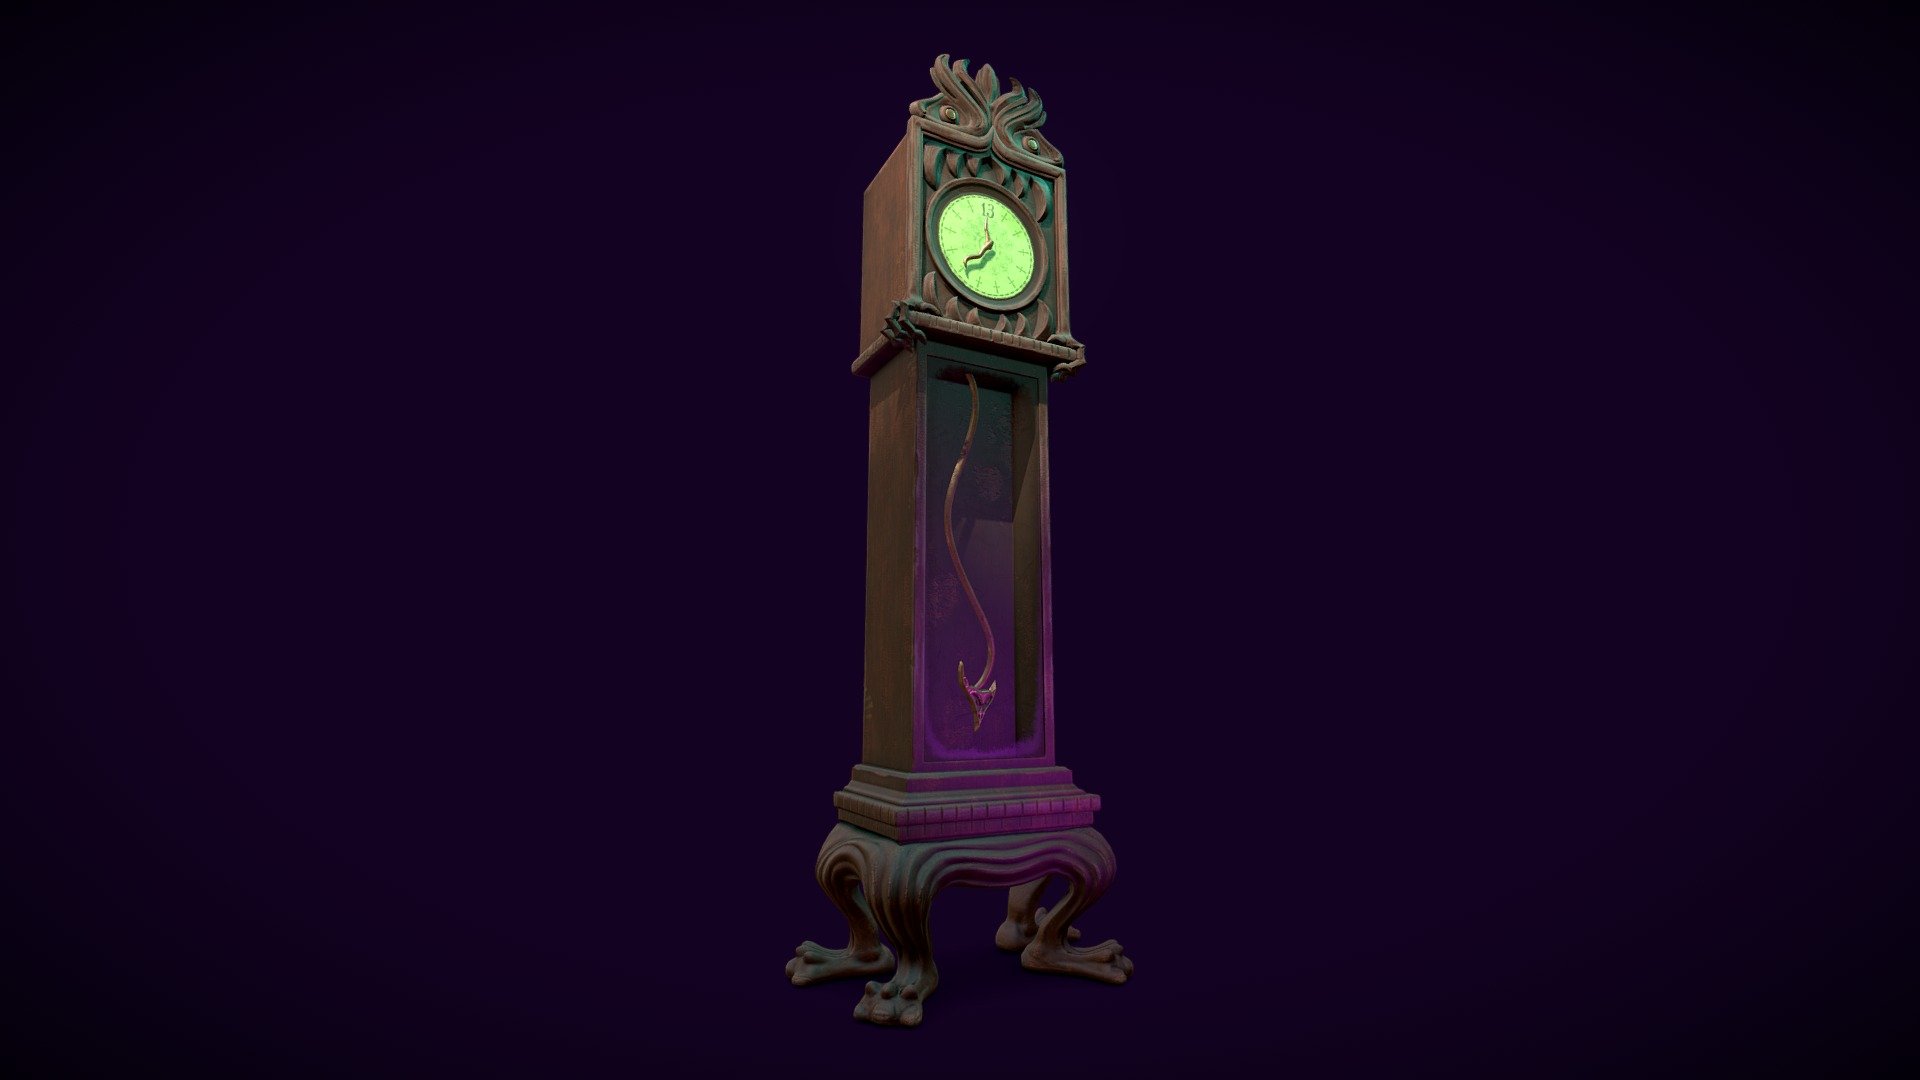 Hello there!

I'm very happy to present my first project in Substance Painter and with full PBR textures that is game-ready.

Art Station Breakdown and BlenderArtists Thread

This is a  replication of a grandfather clock found in the Disney attraction, The Haunted Mansion. 

Optimized low-poly and high-poly sculpt were made  entirely in Blender. The model was then exported into Substance Painter for texturing.

References (from various online source)

 - Haunted Mansion Grandfather Clock - 3D model by Olivia Sabatka (@discopears) 3d model